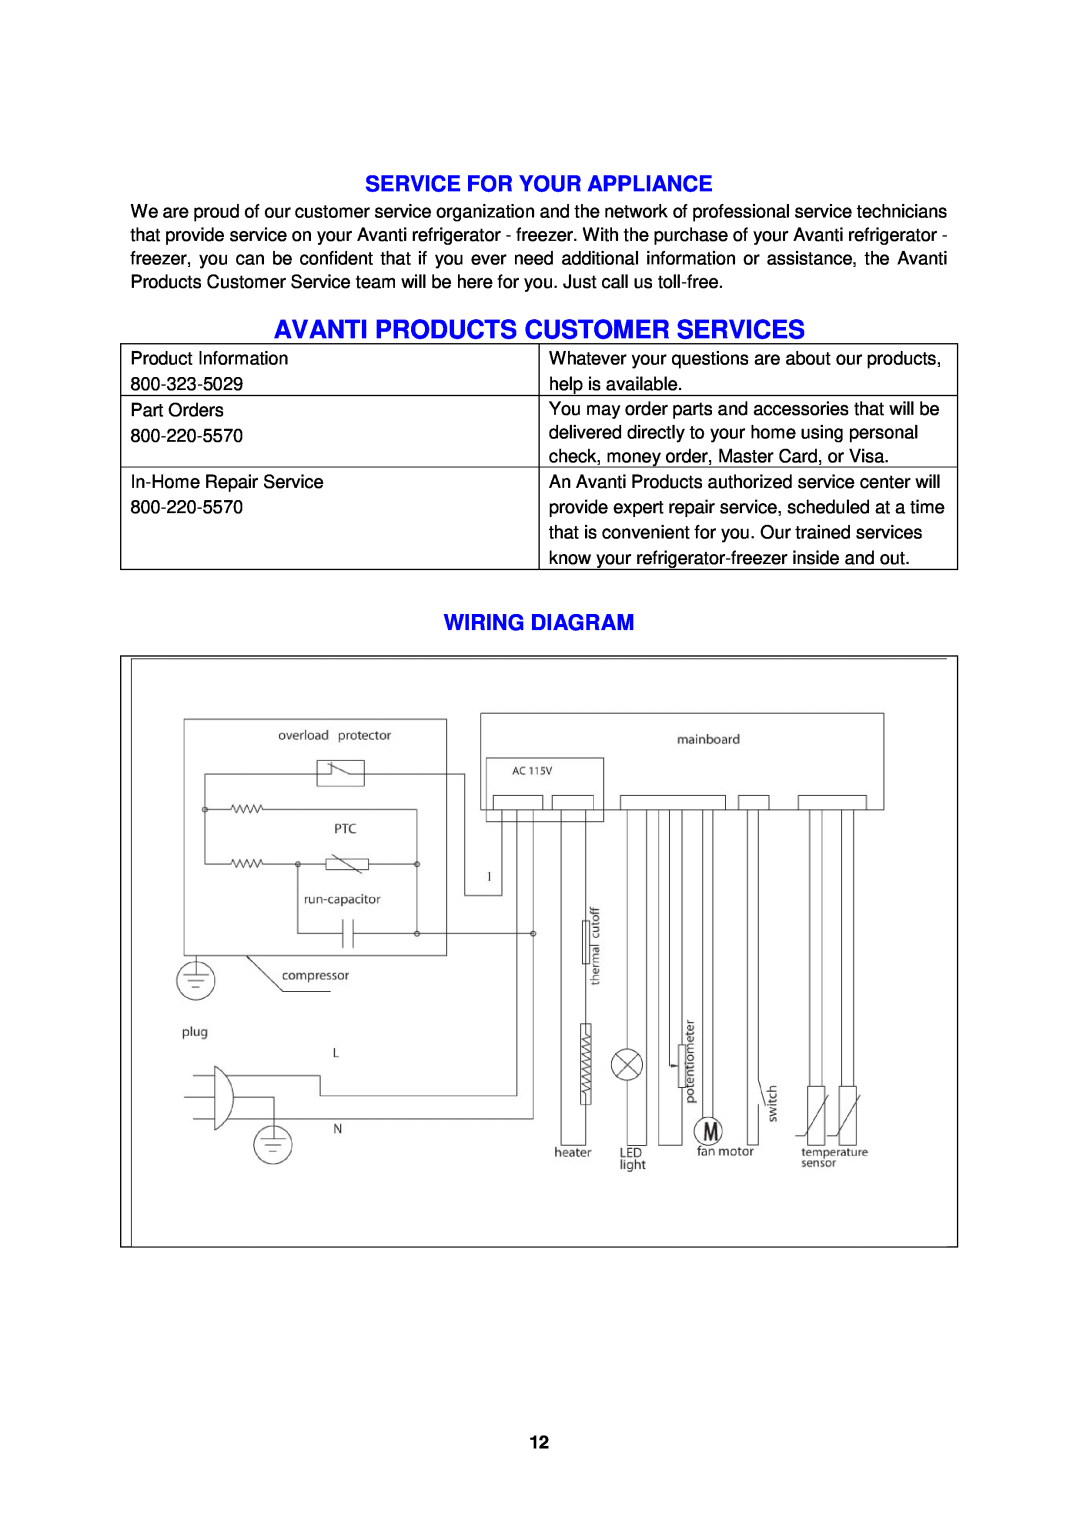 Avanti FF432W, FF433PS instruction manual Service For Your Appliance, Wiring Diagram, Avanti Products Customer Services 